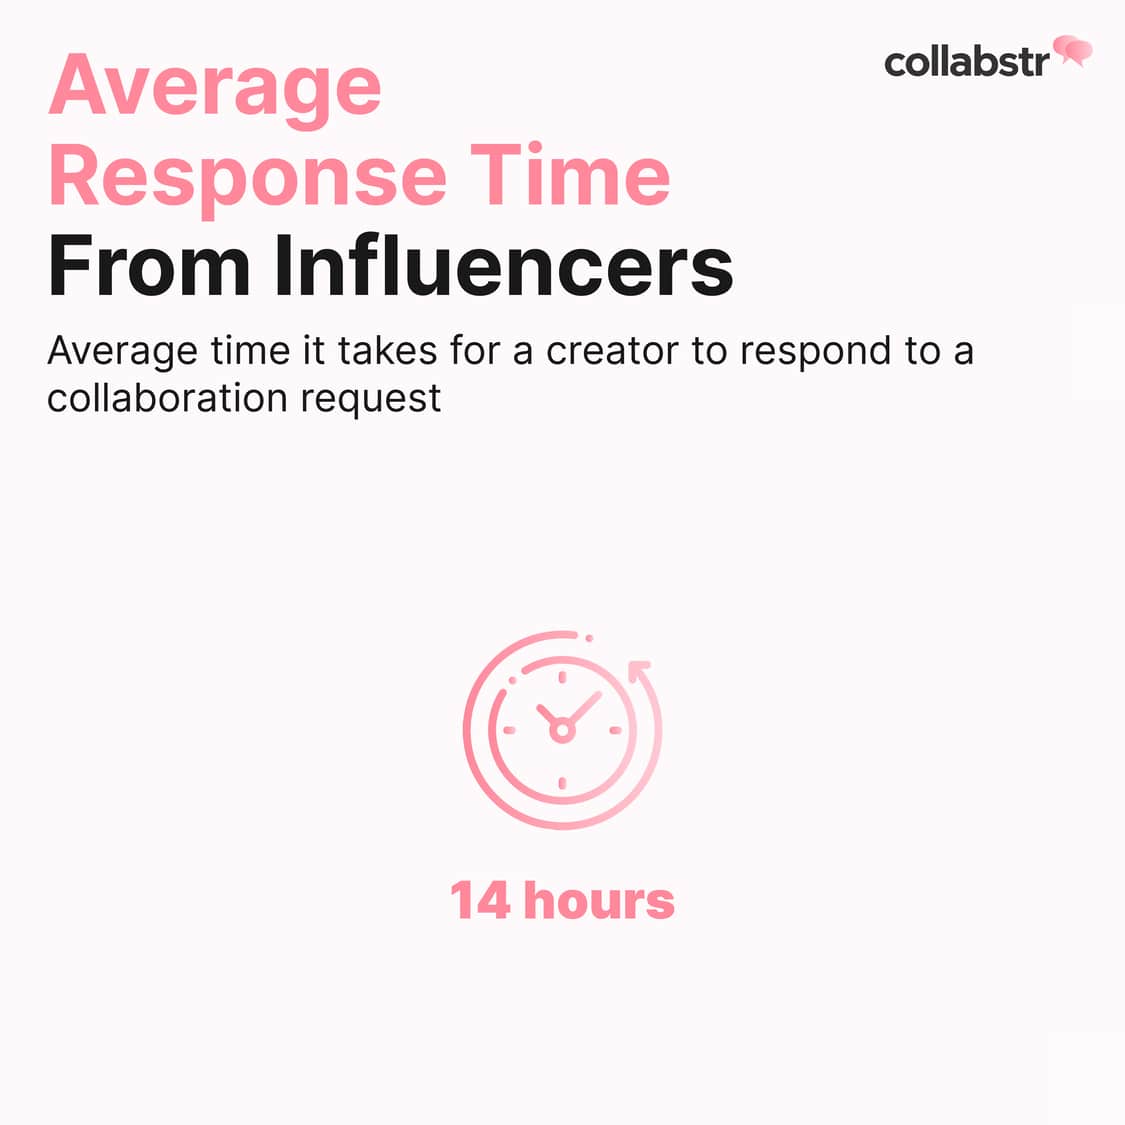 The average time it takes for influencers to respond to a request for collaboration is 14 hours.